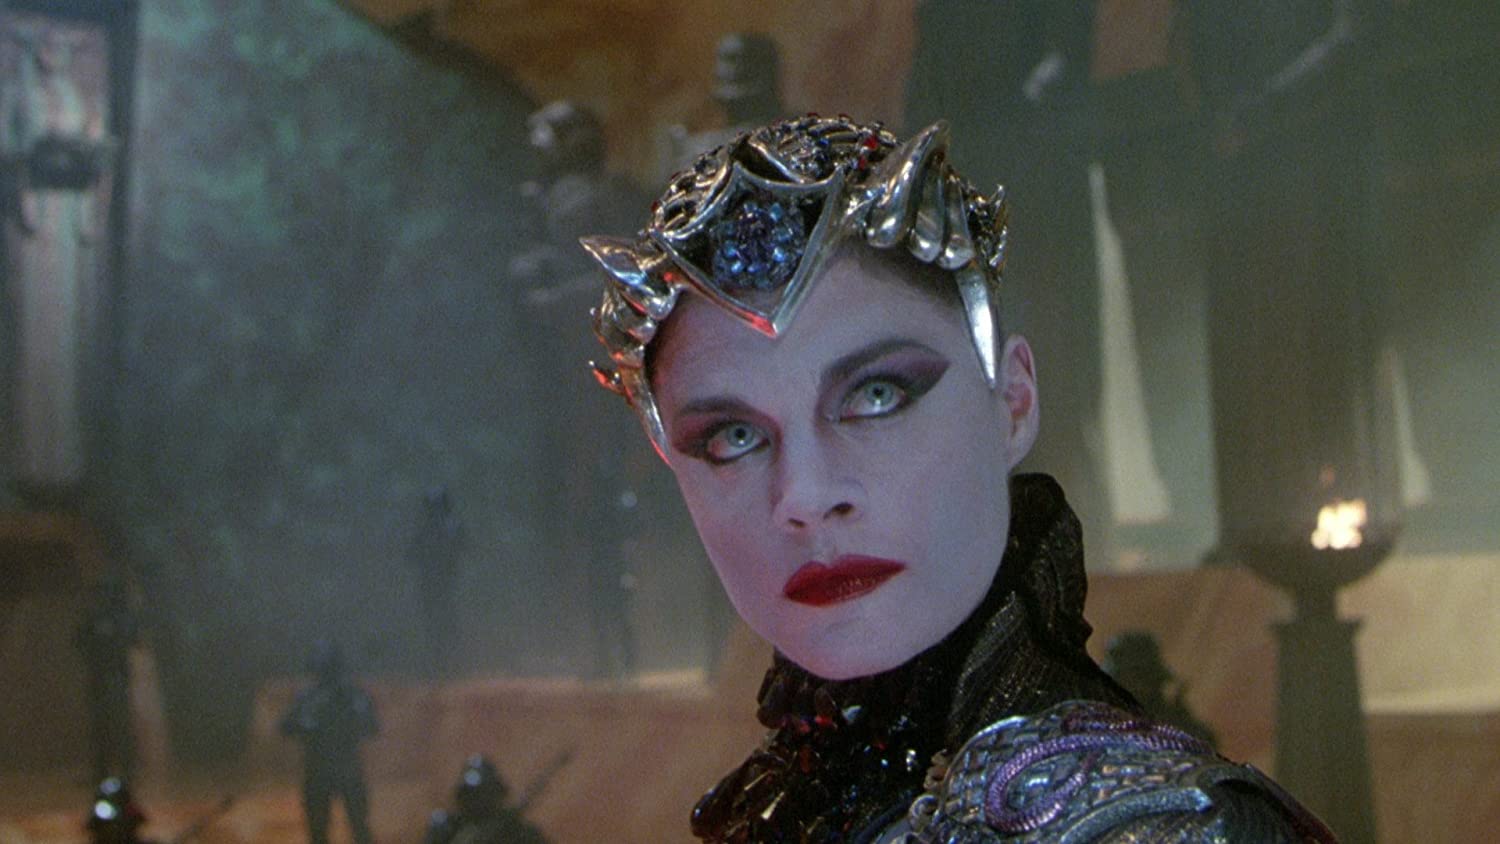 Meg Foster in "Masters of the Universe" (1987) © Amazon Studios